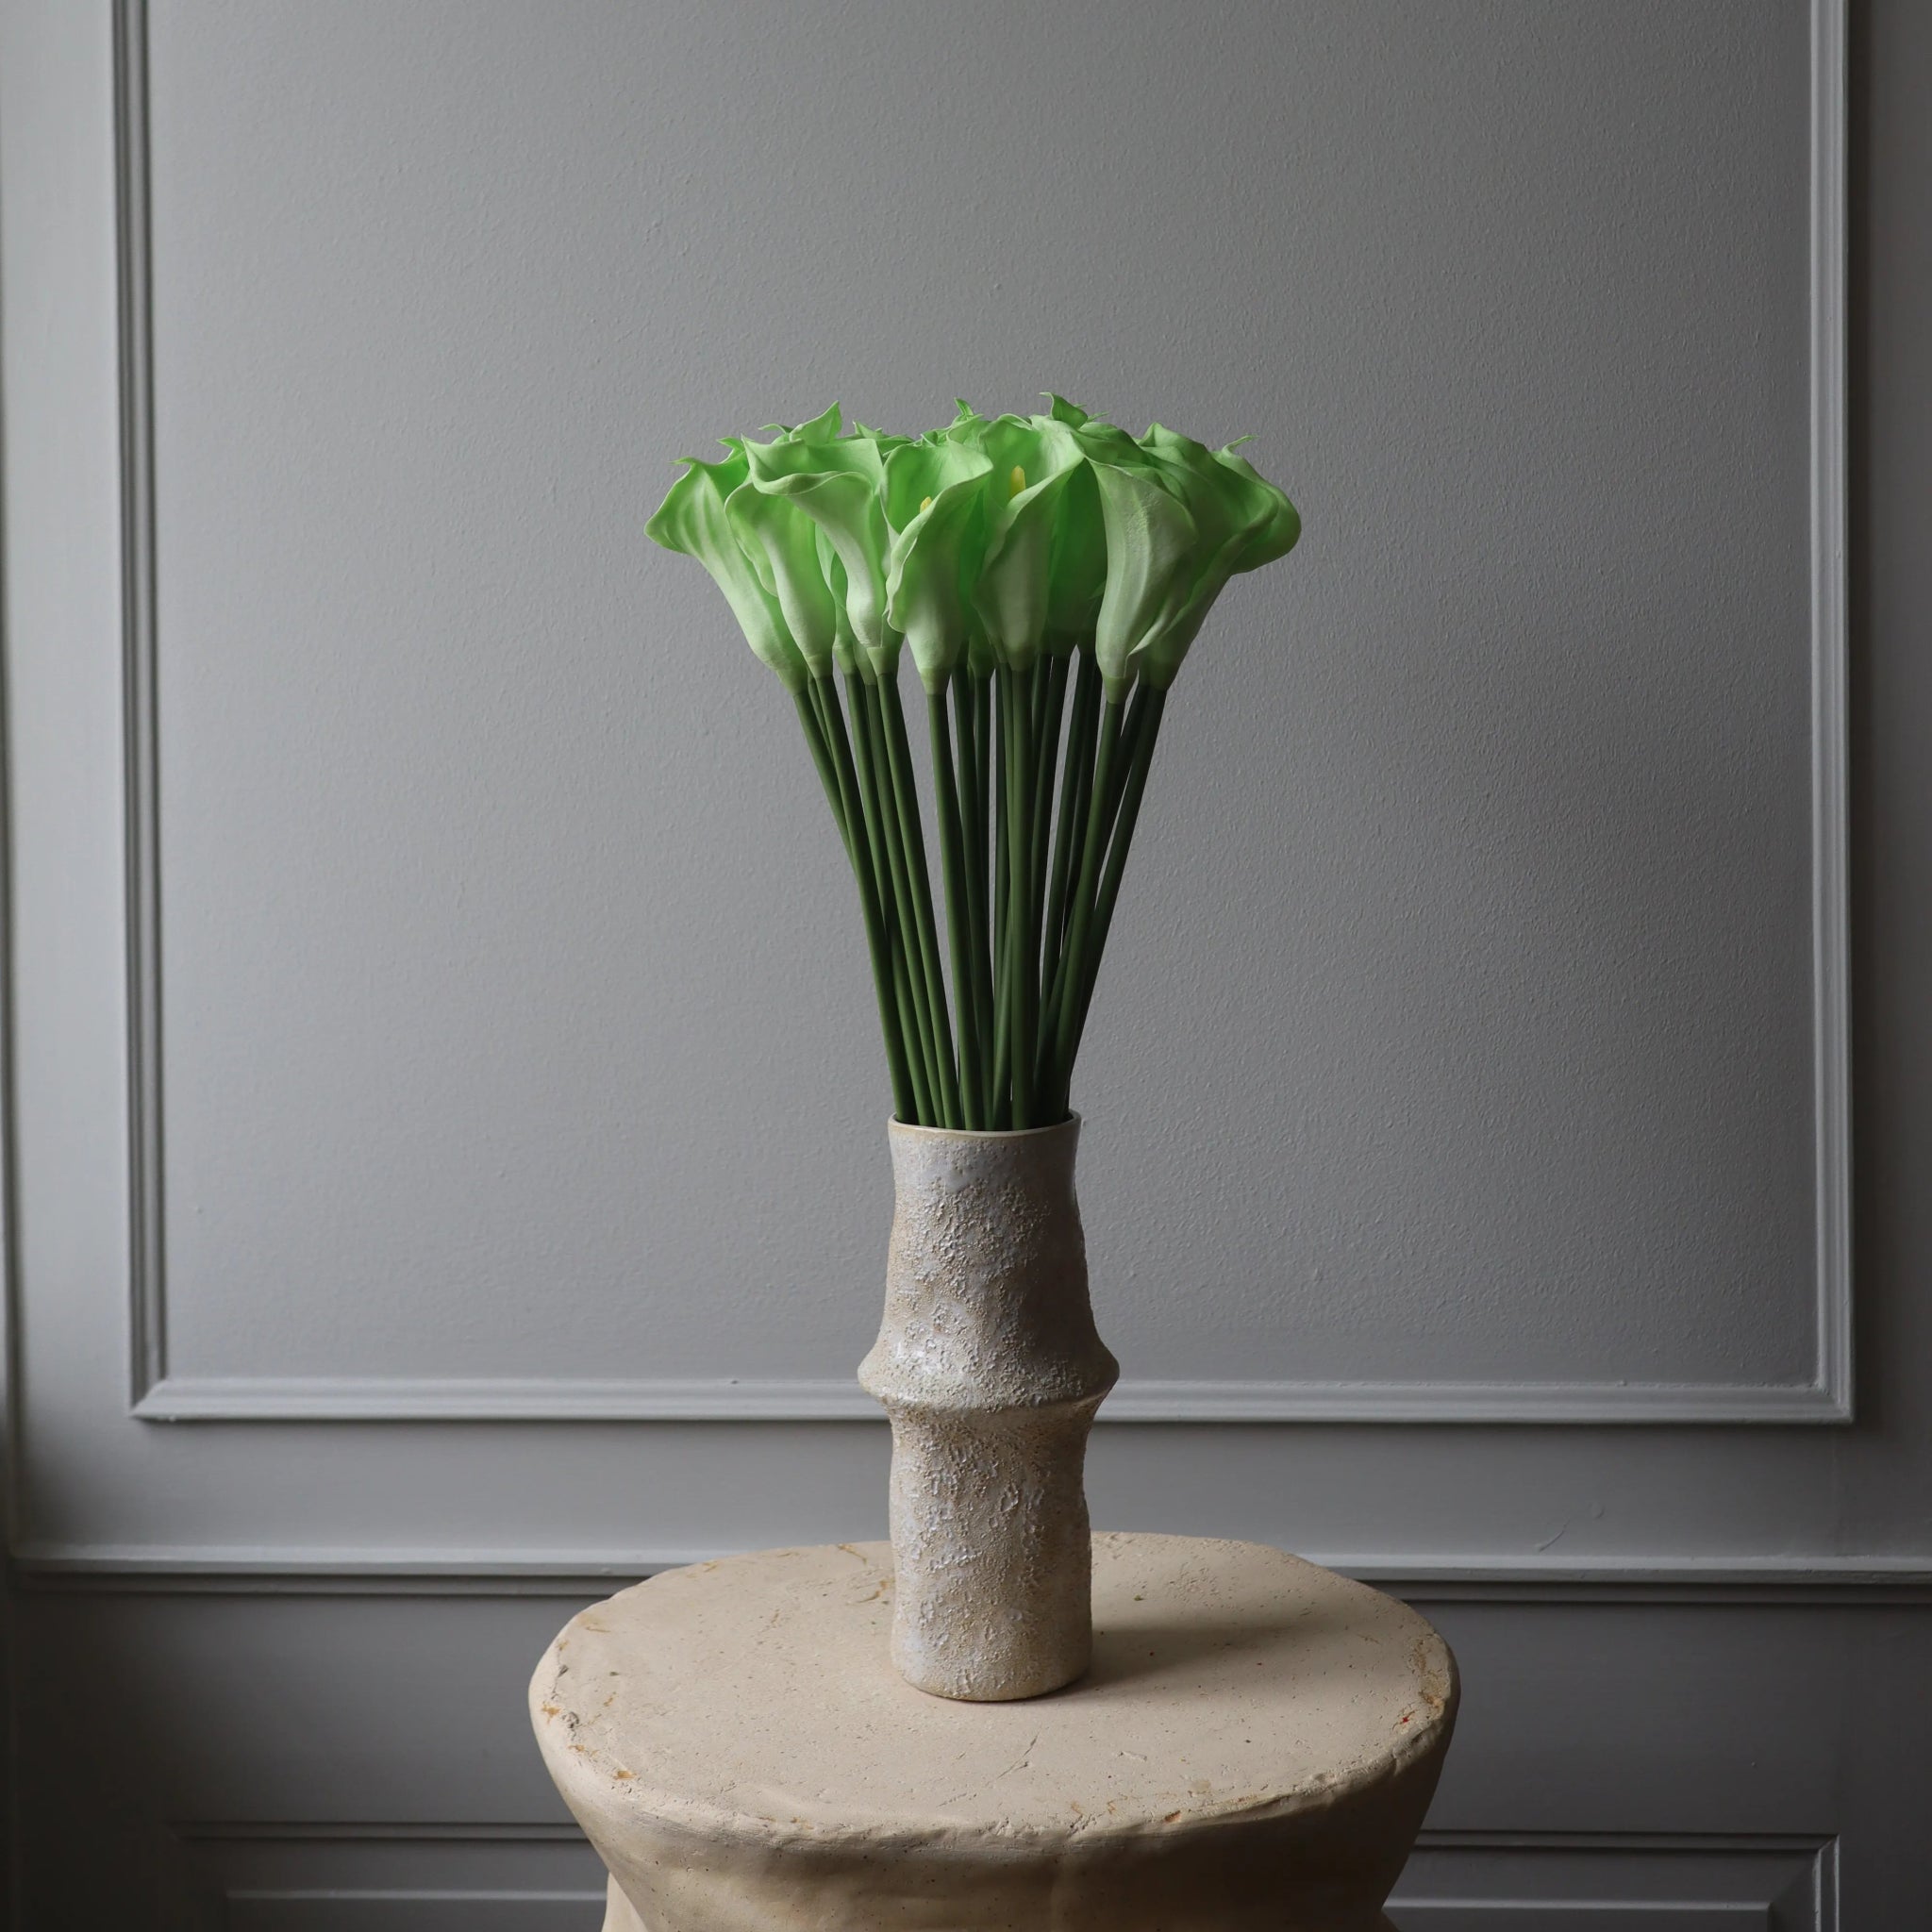 Calla Lily Flower in Green from Botané